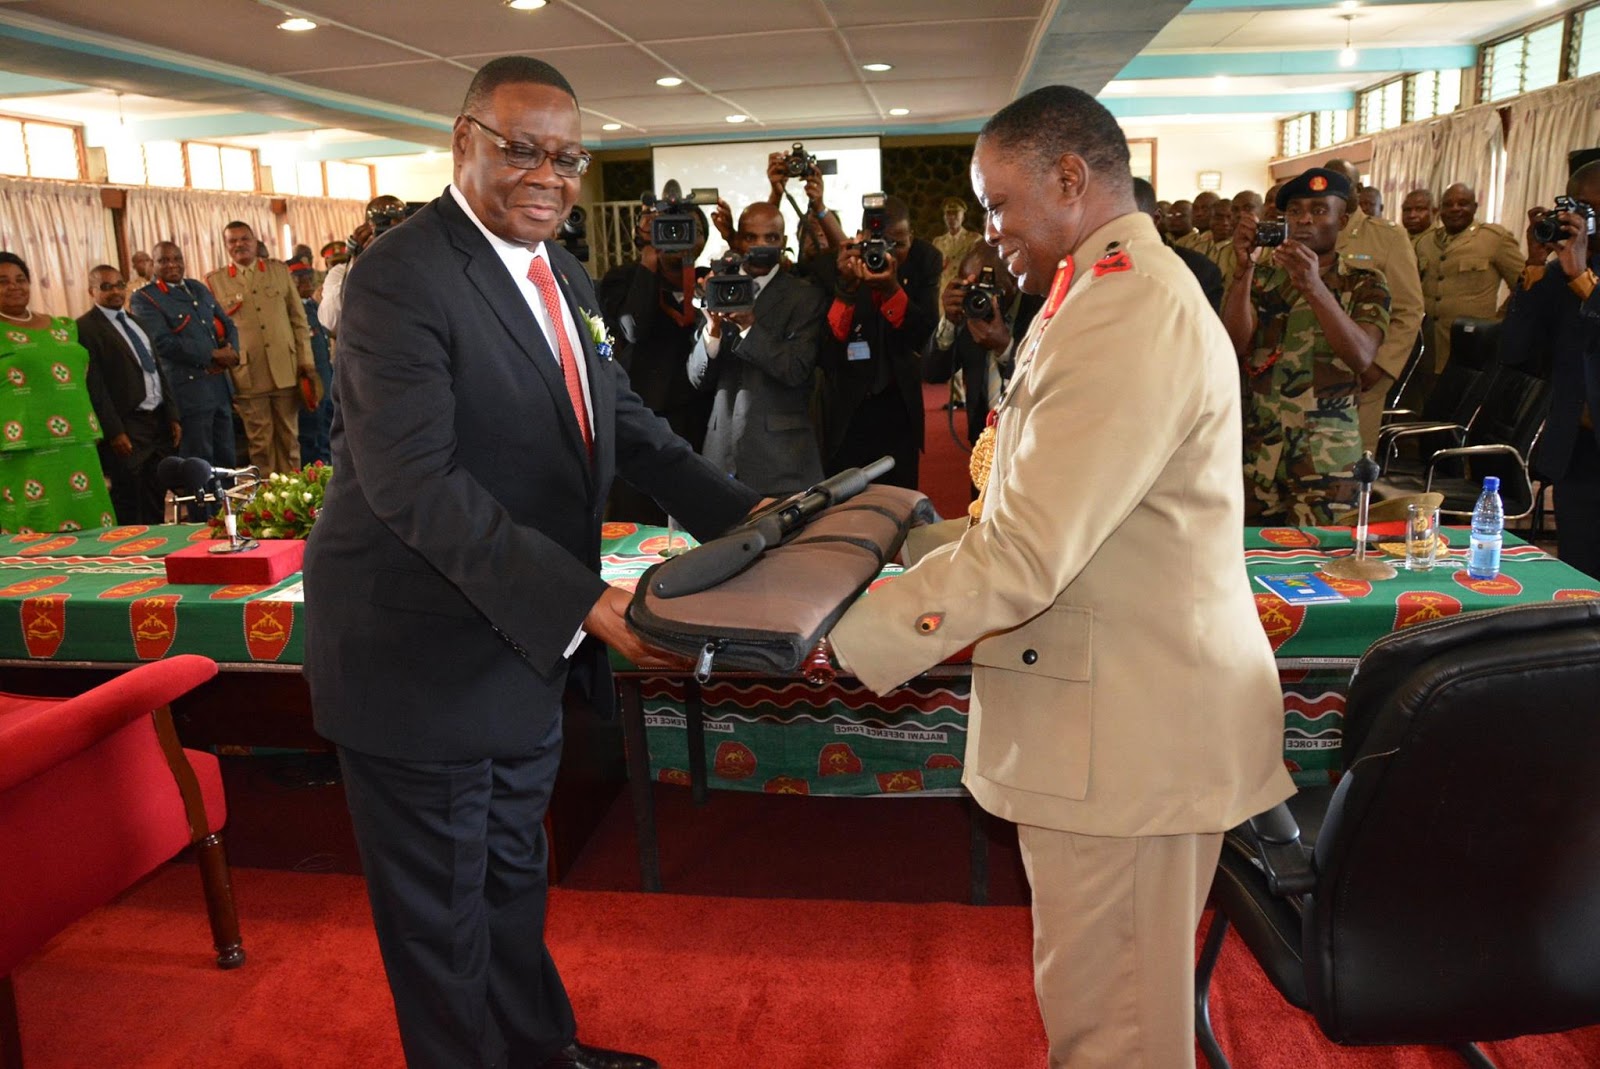 Controversy over the firing of Malawi Army Commander by Mutharika